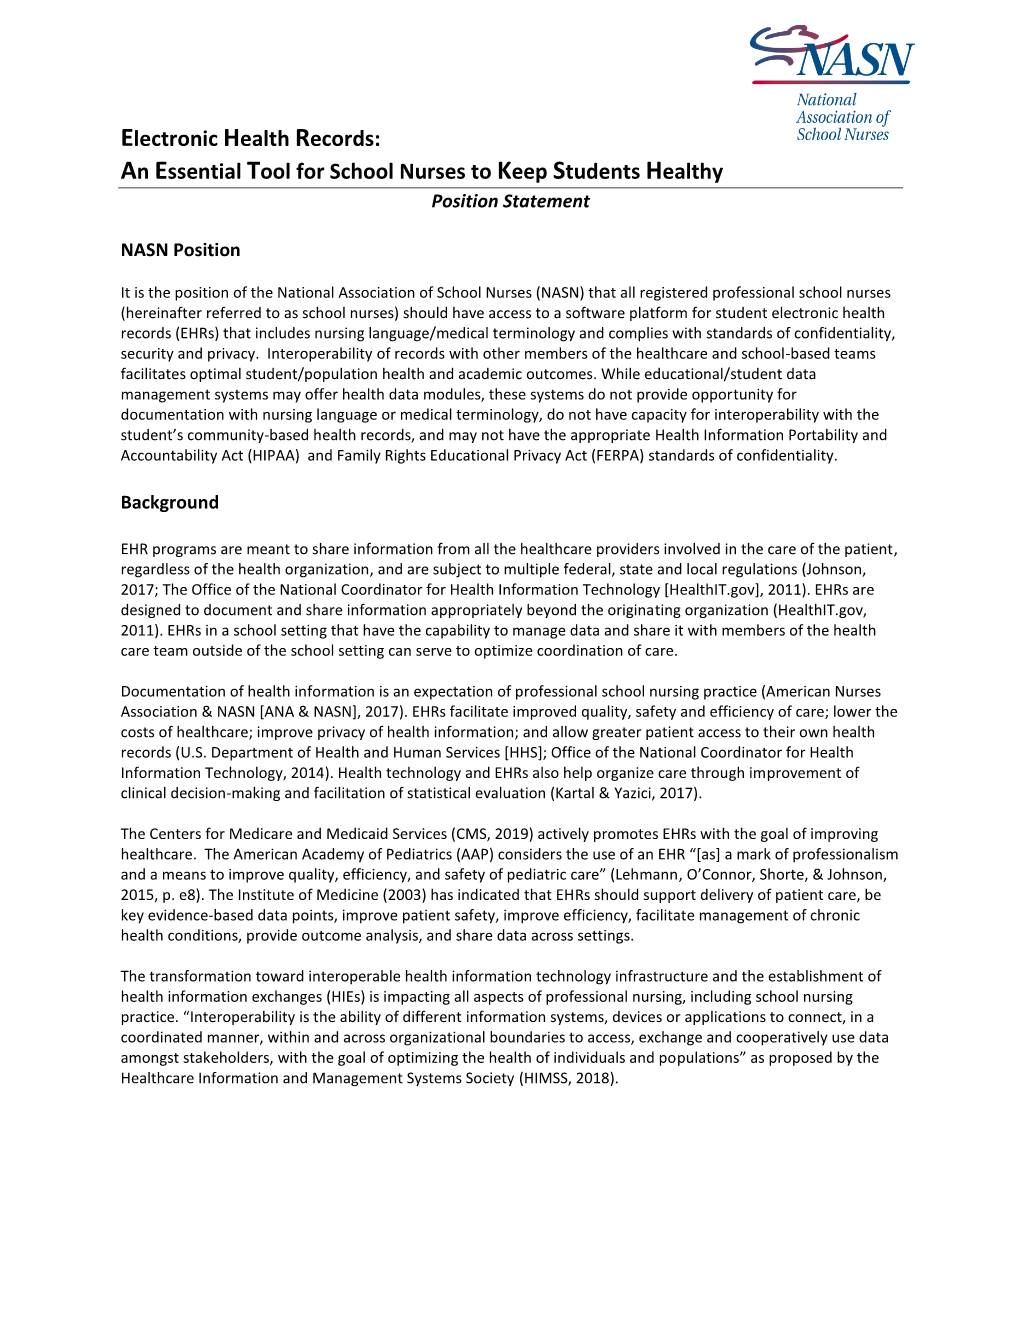 Electronic Health Records: an Essential Tool for School Nurses to Keep Students Healthy Position Statement